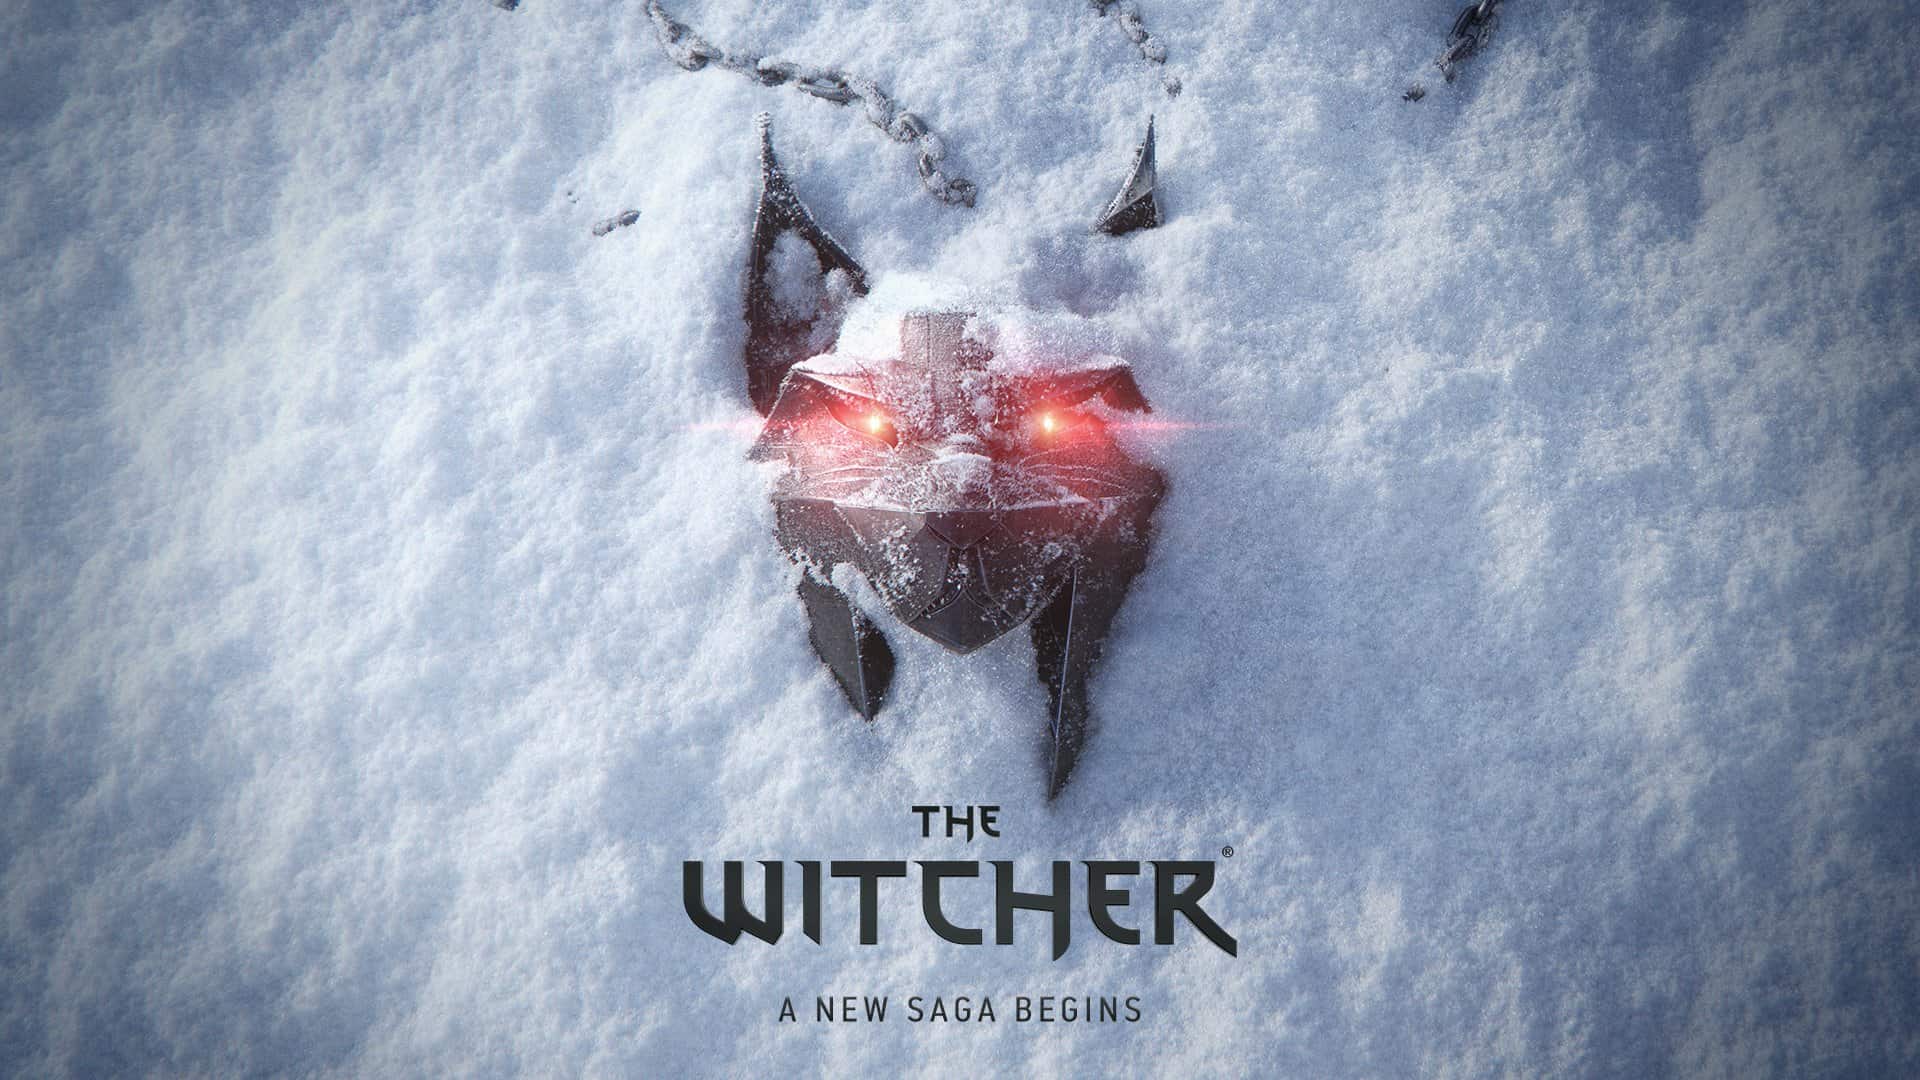 CD Projekt Red confirms a new The Witcher trilogy, and two further Witcher games